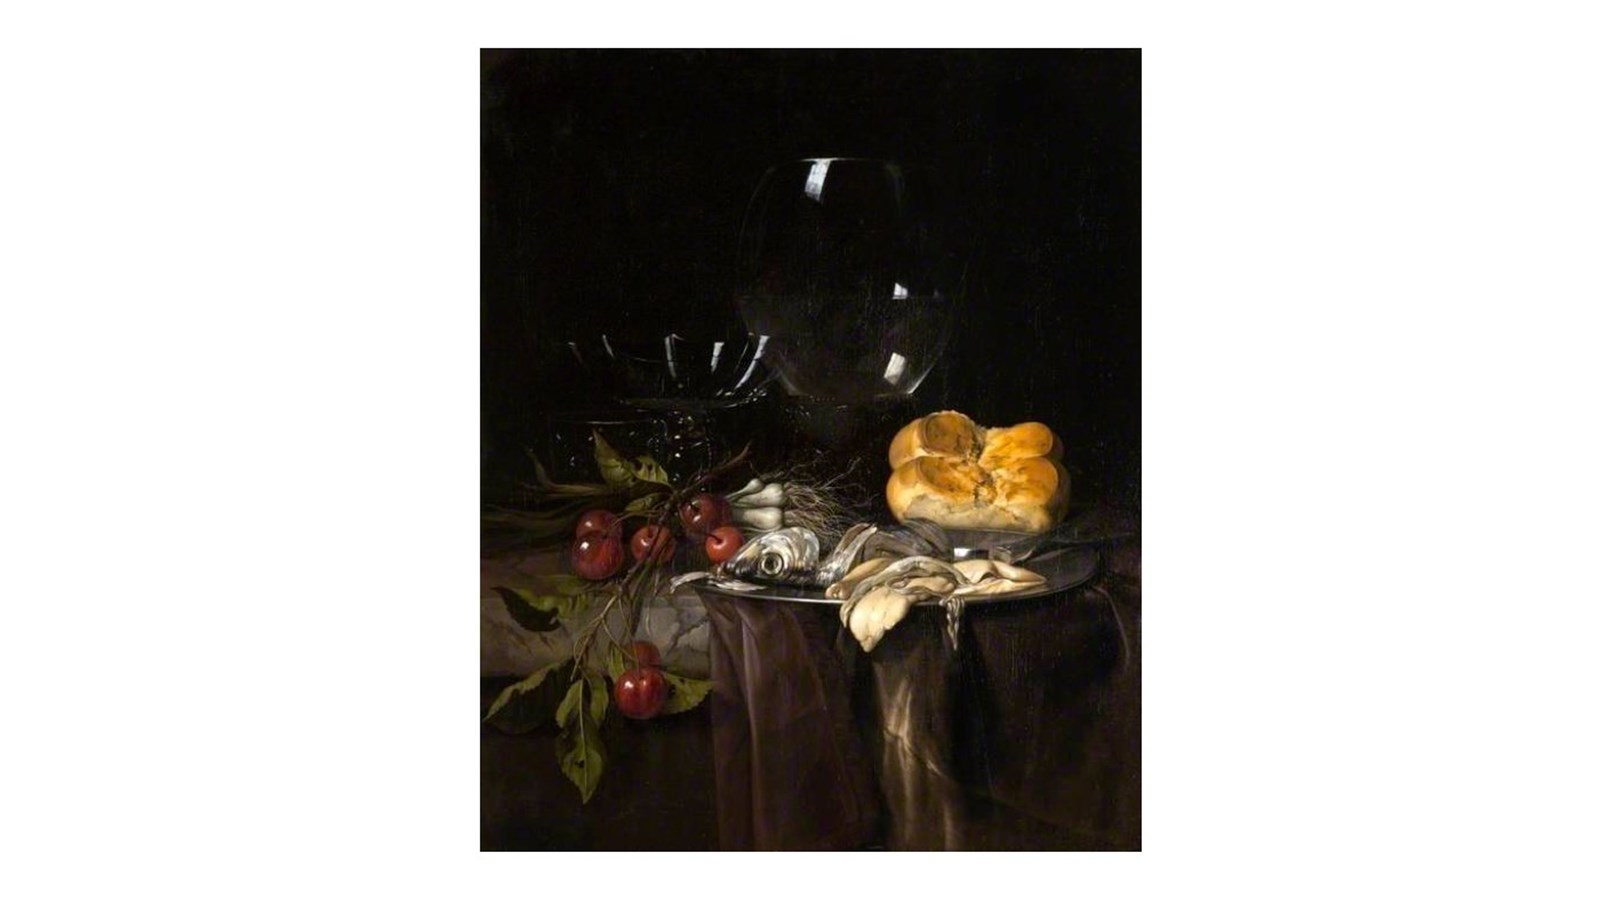 a dark still life painting showing food against a dark background.